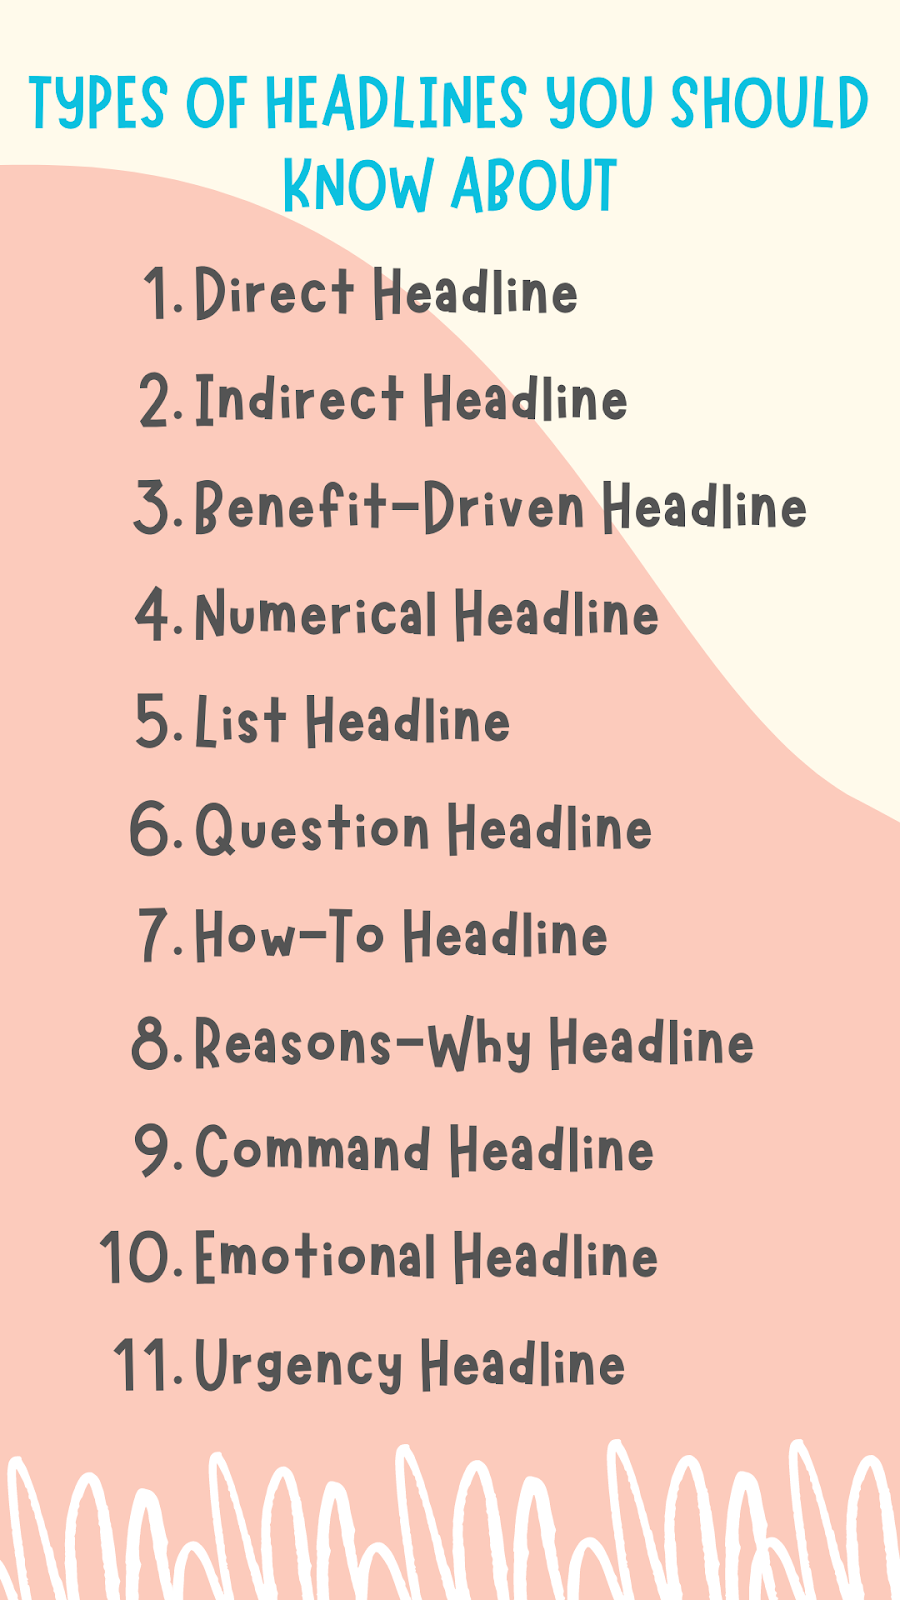 Types of Headlines You Should Know About